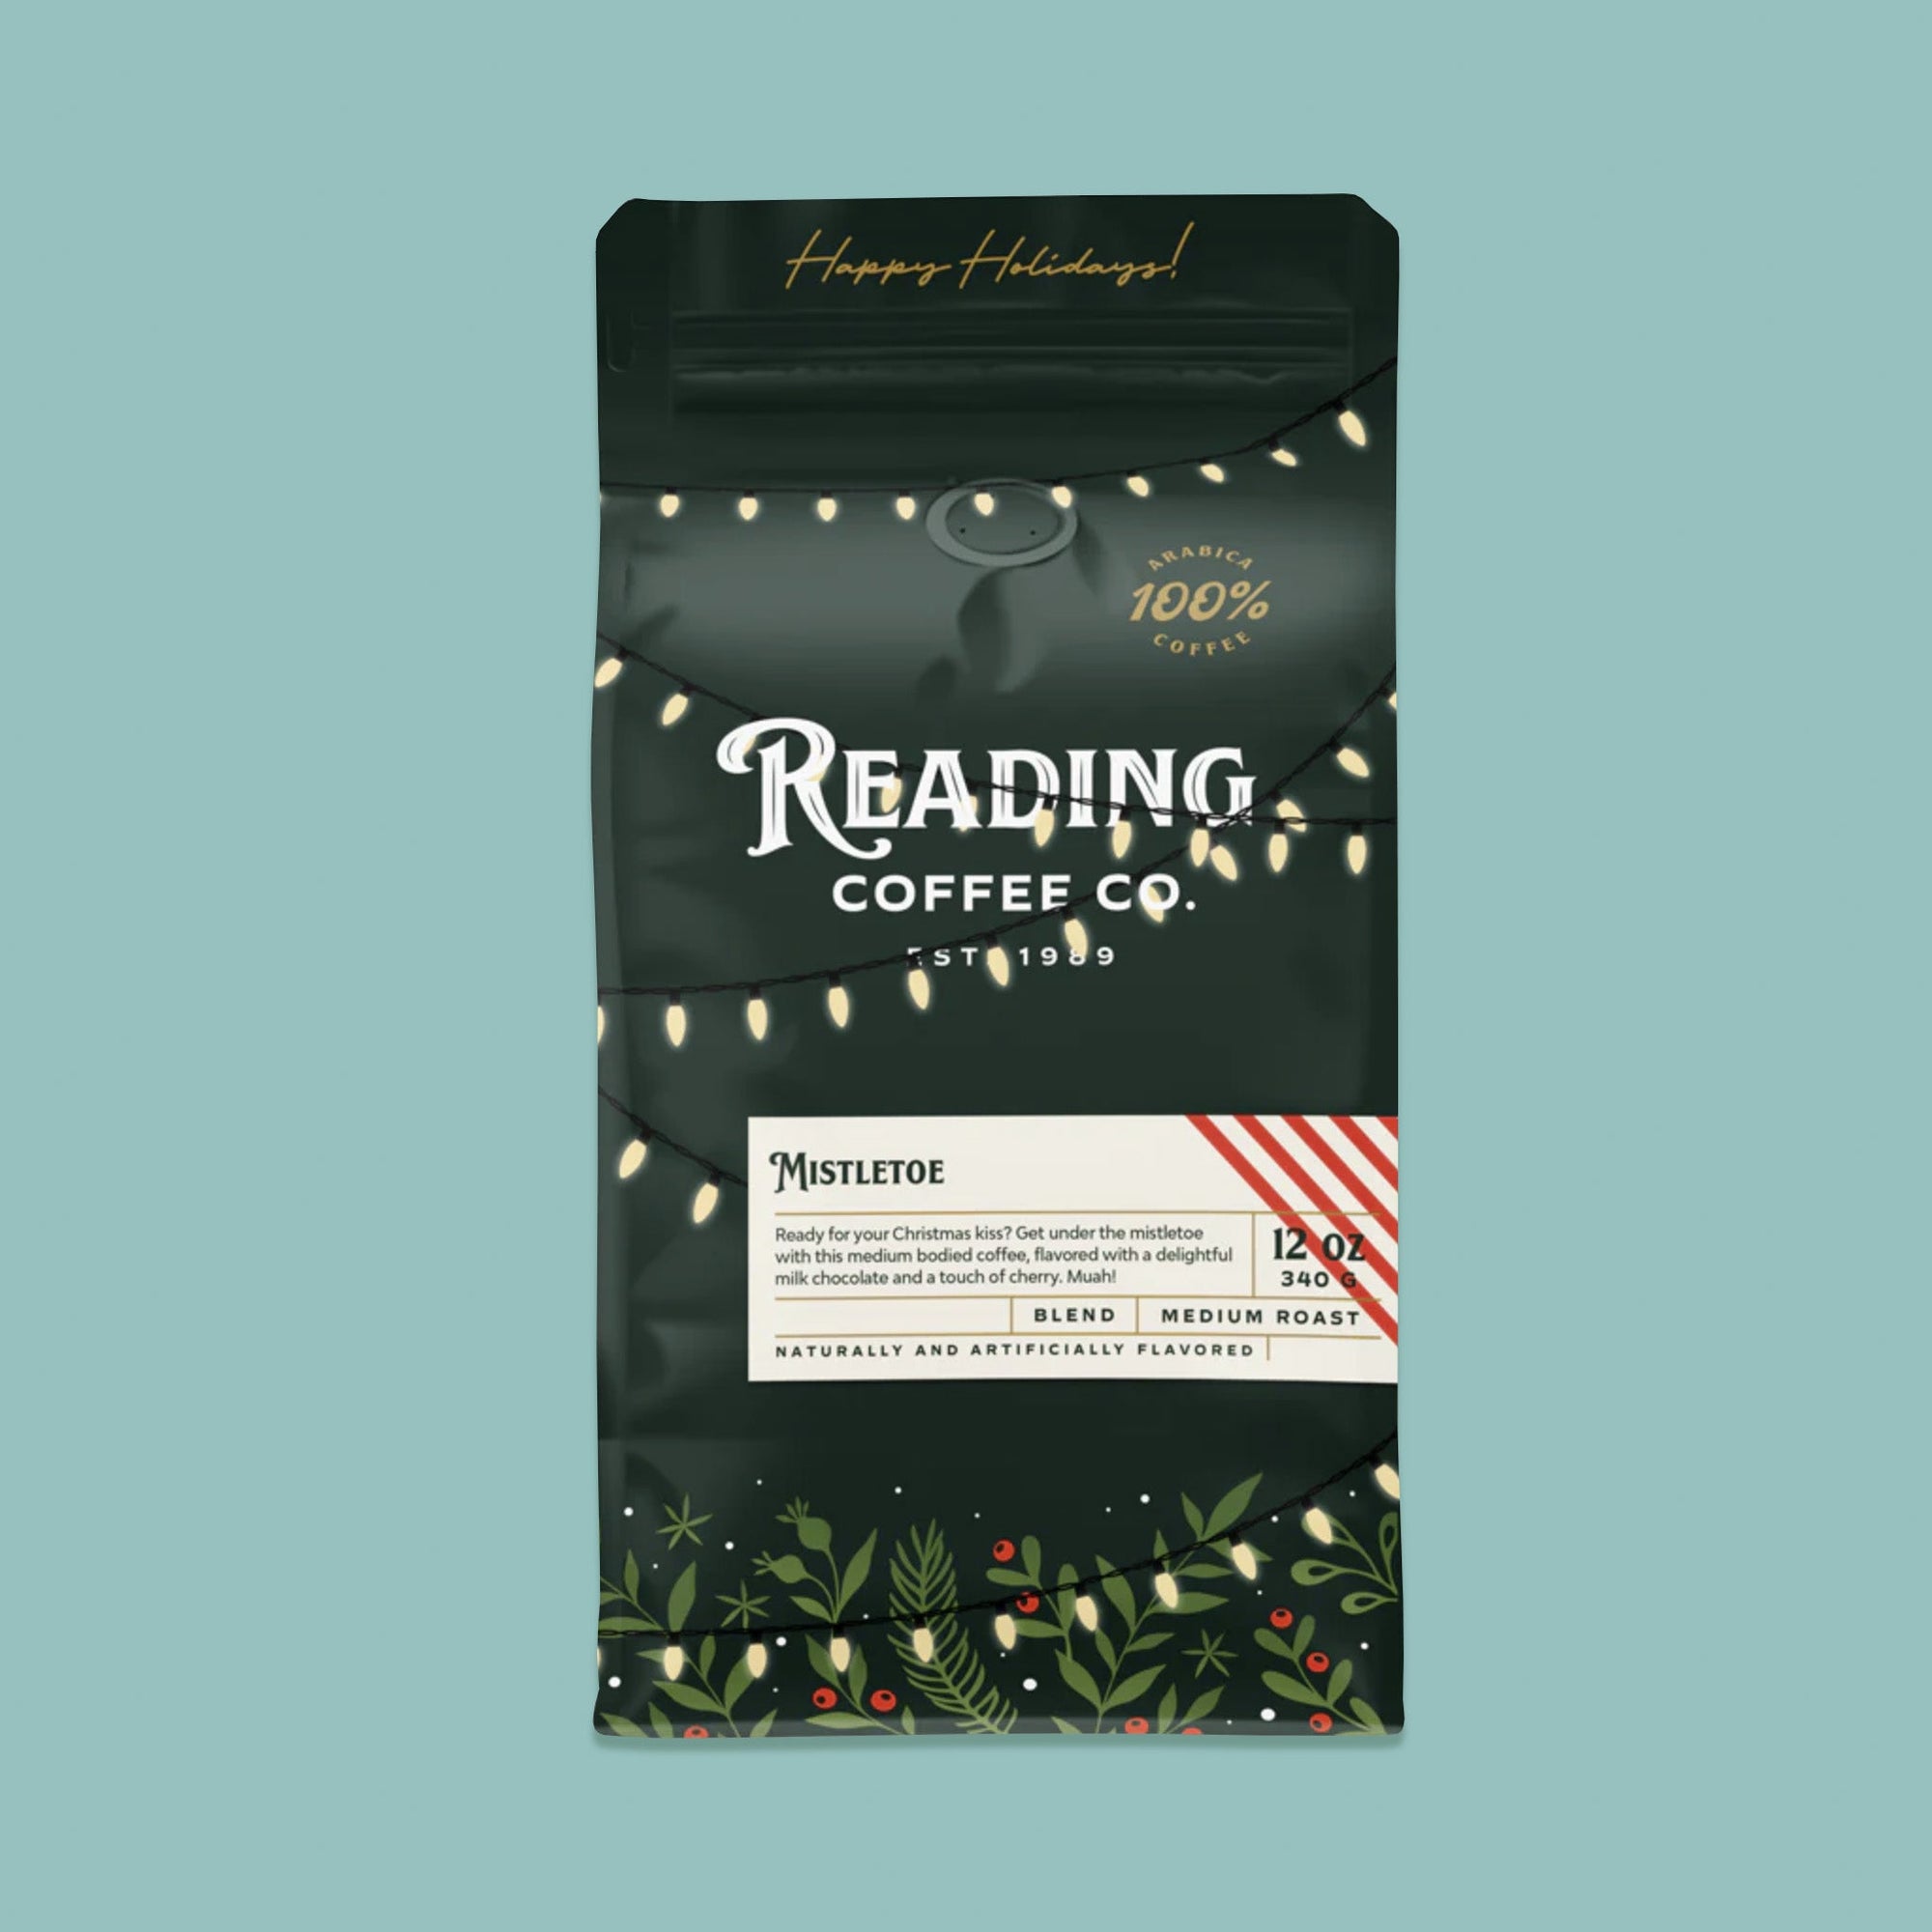 On a sage green background sits a dark green package of coffee. This package is gold, white, and dark green lettering. There are swags of lights and greenery with berries. It says "Happy Holidays!", "Reading Coffee Co. Est. 1989", "Mistletoe Coffee Blend Medium Roast." It is '100% Arabica Coffee. It also says "Ready for your Christmas kiss? Get under the mistletoe wiht this medium bodied coffee, flavored with a delightful milk chocolate and a touch of cherry. Muah!" 12 oz 340g